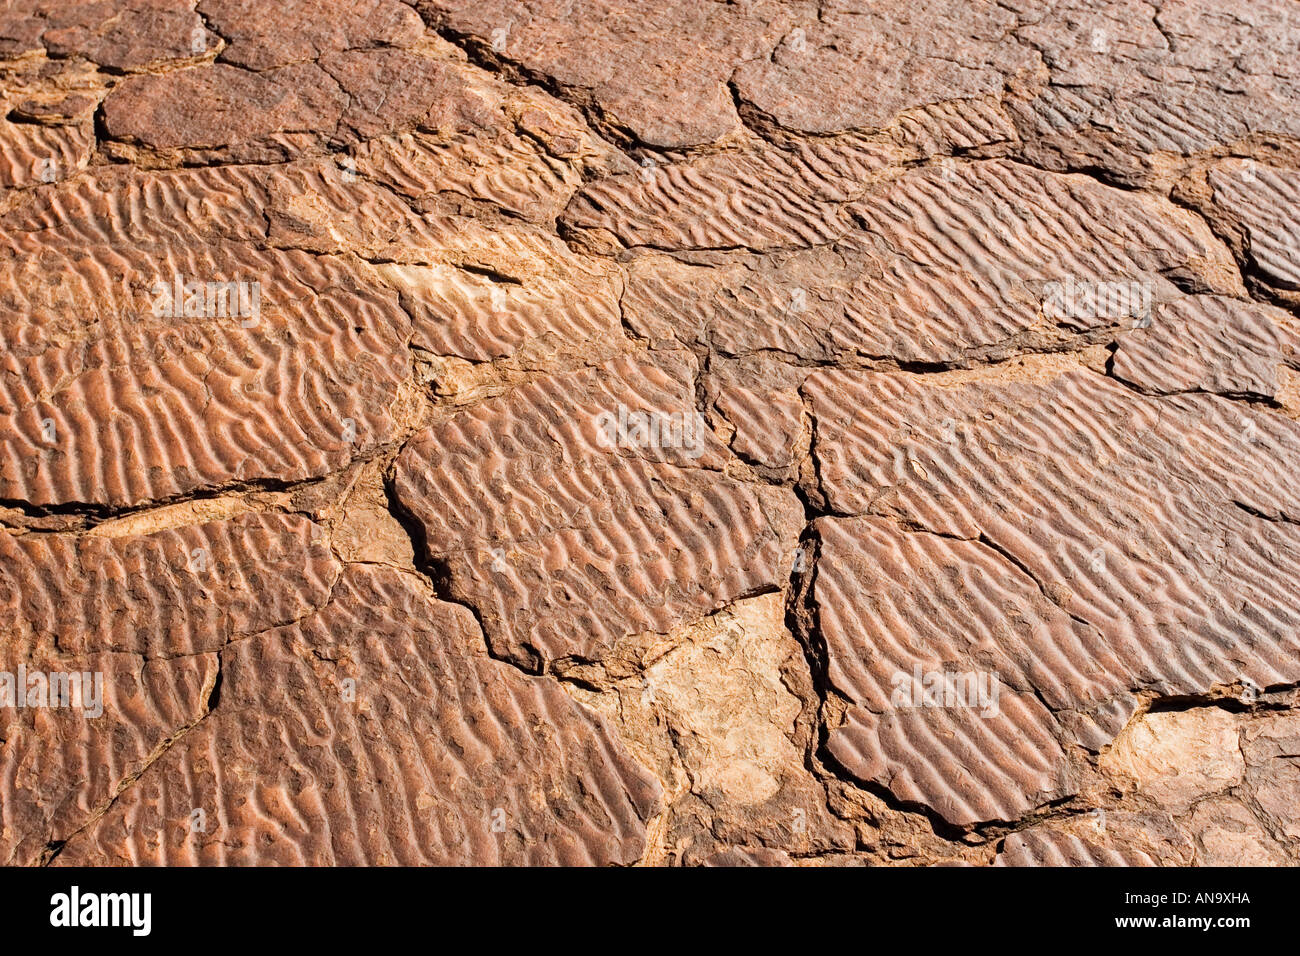 Ripple marks preserved in the Mereenie sandstone at King s Canyon Northern Territory Australia Stock Photo